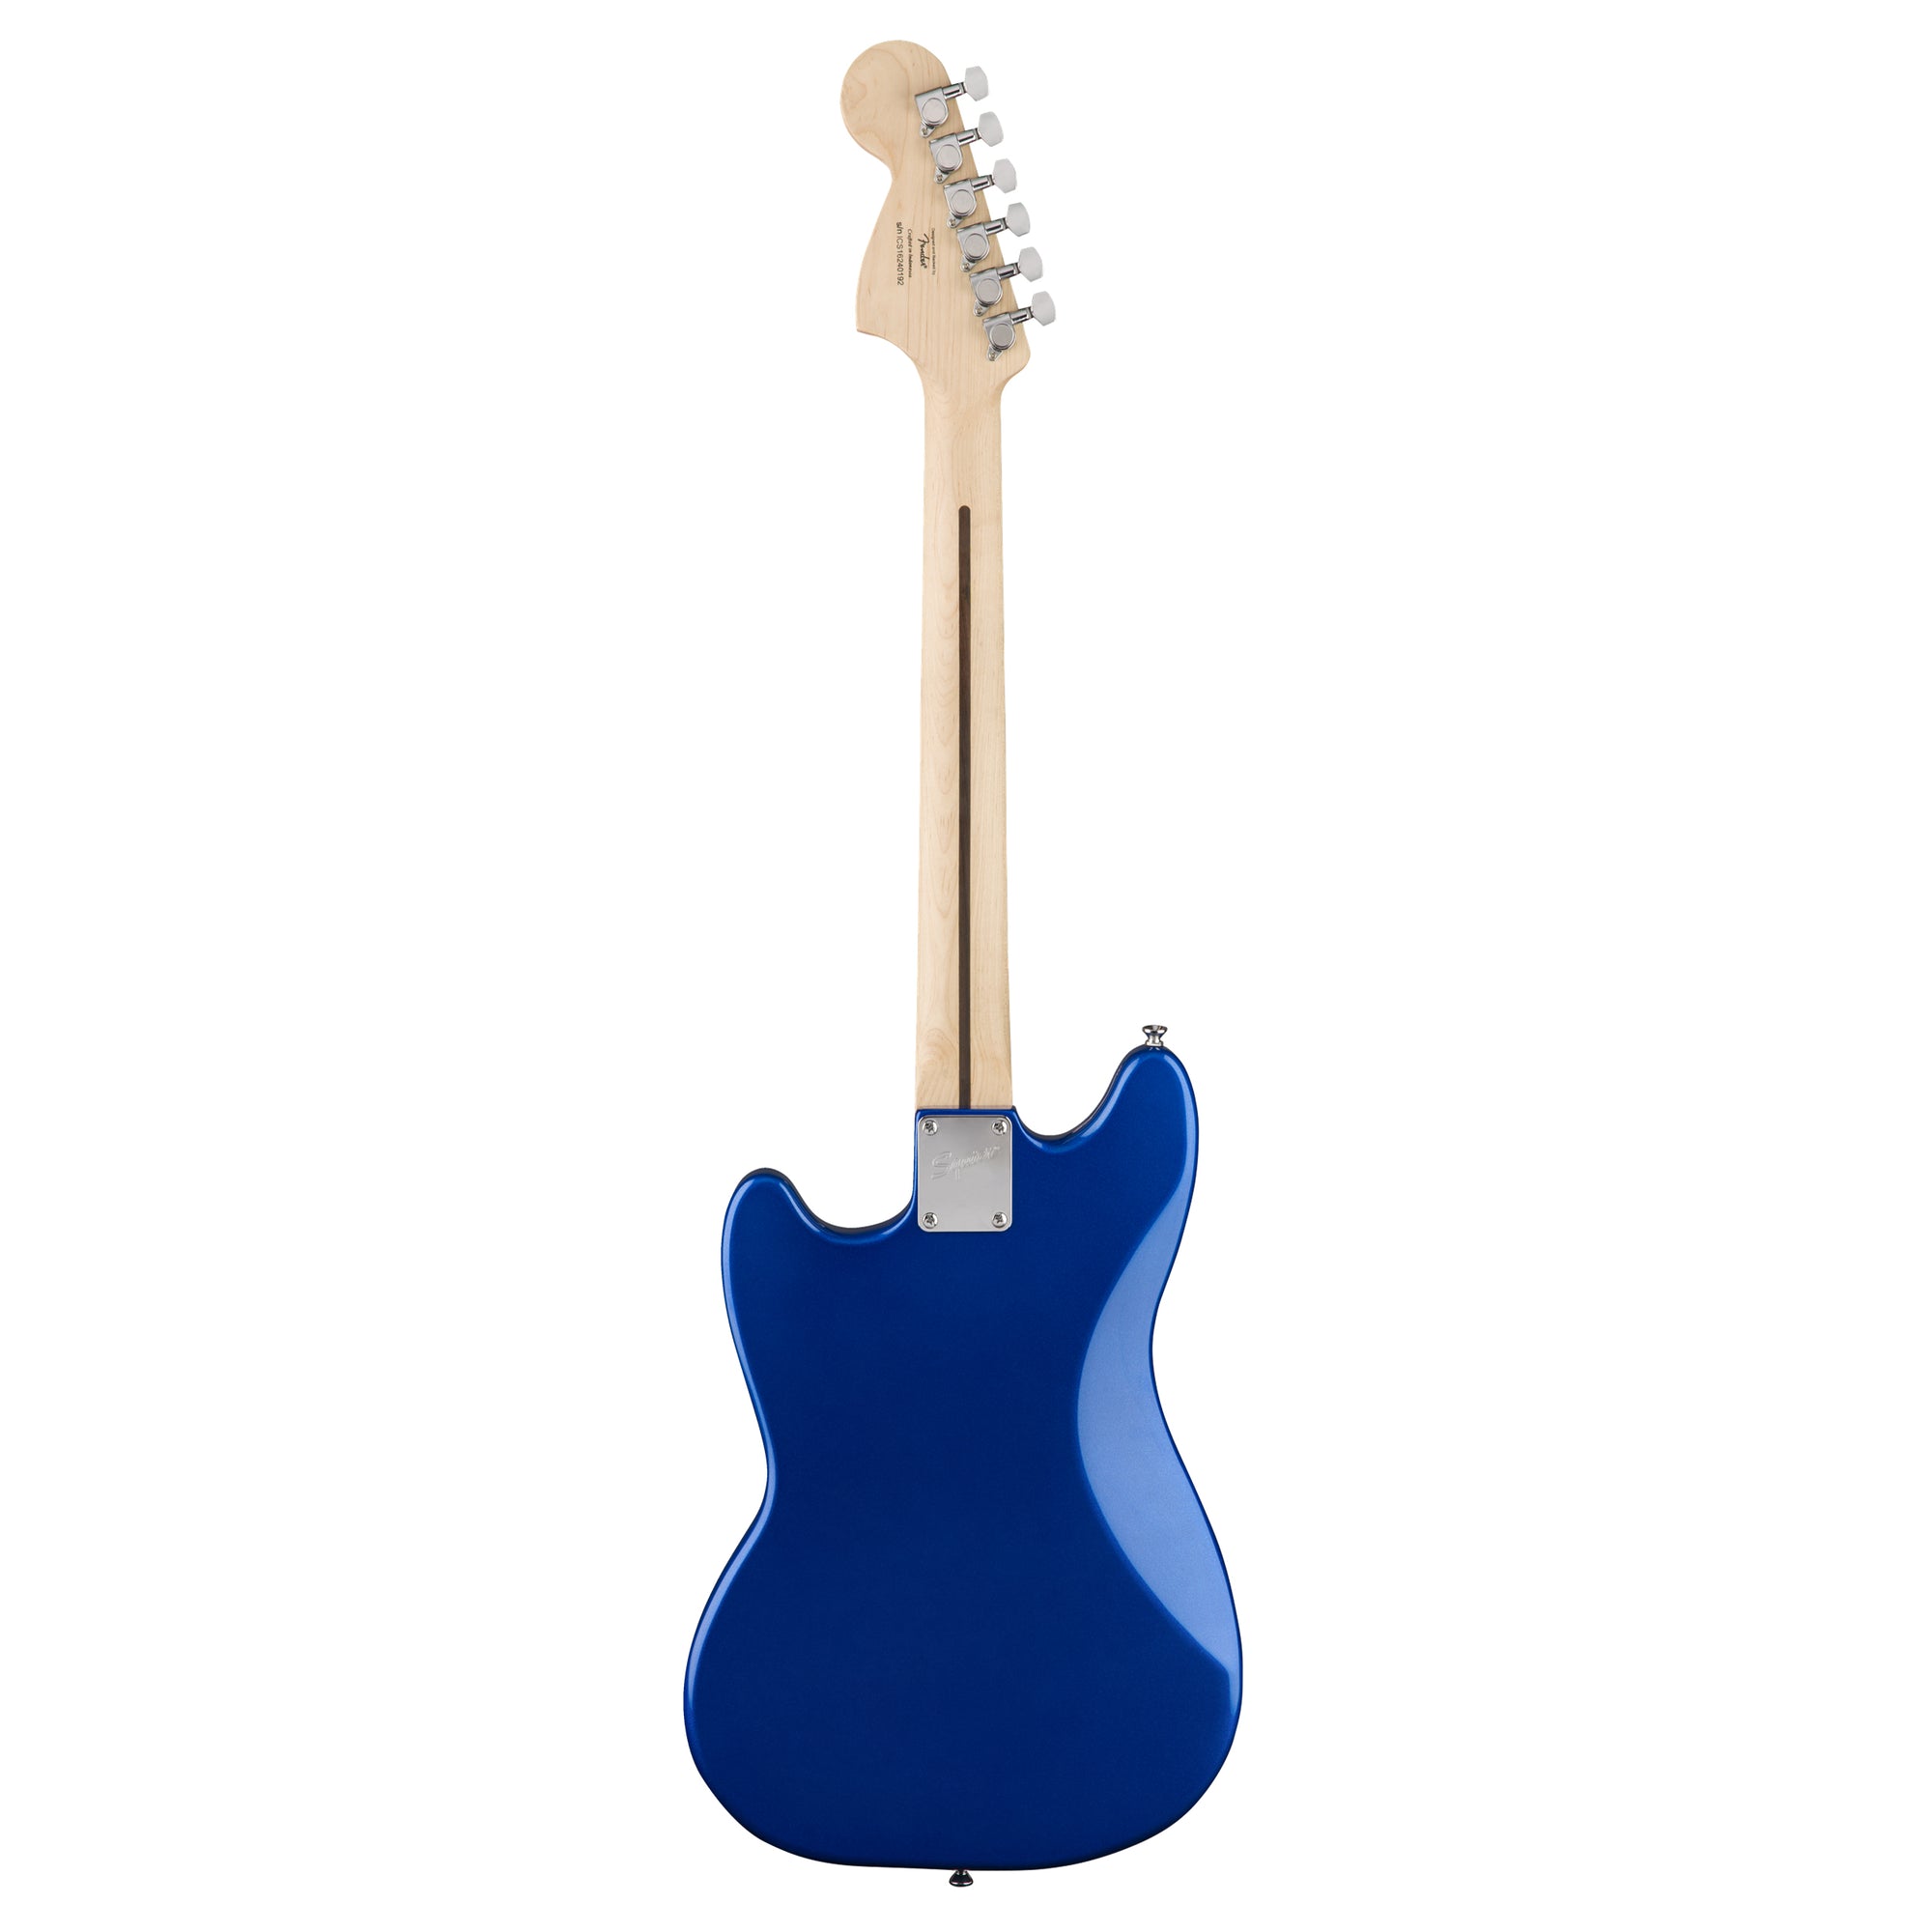 Squier Bullet Mustang HH Imperial Blue